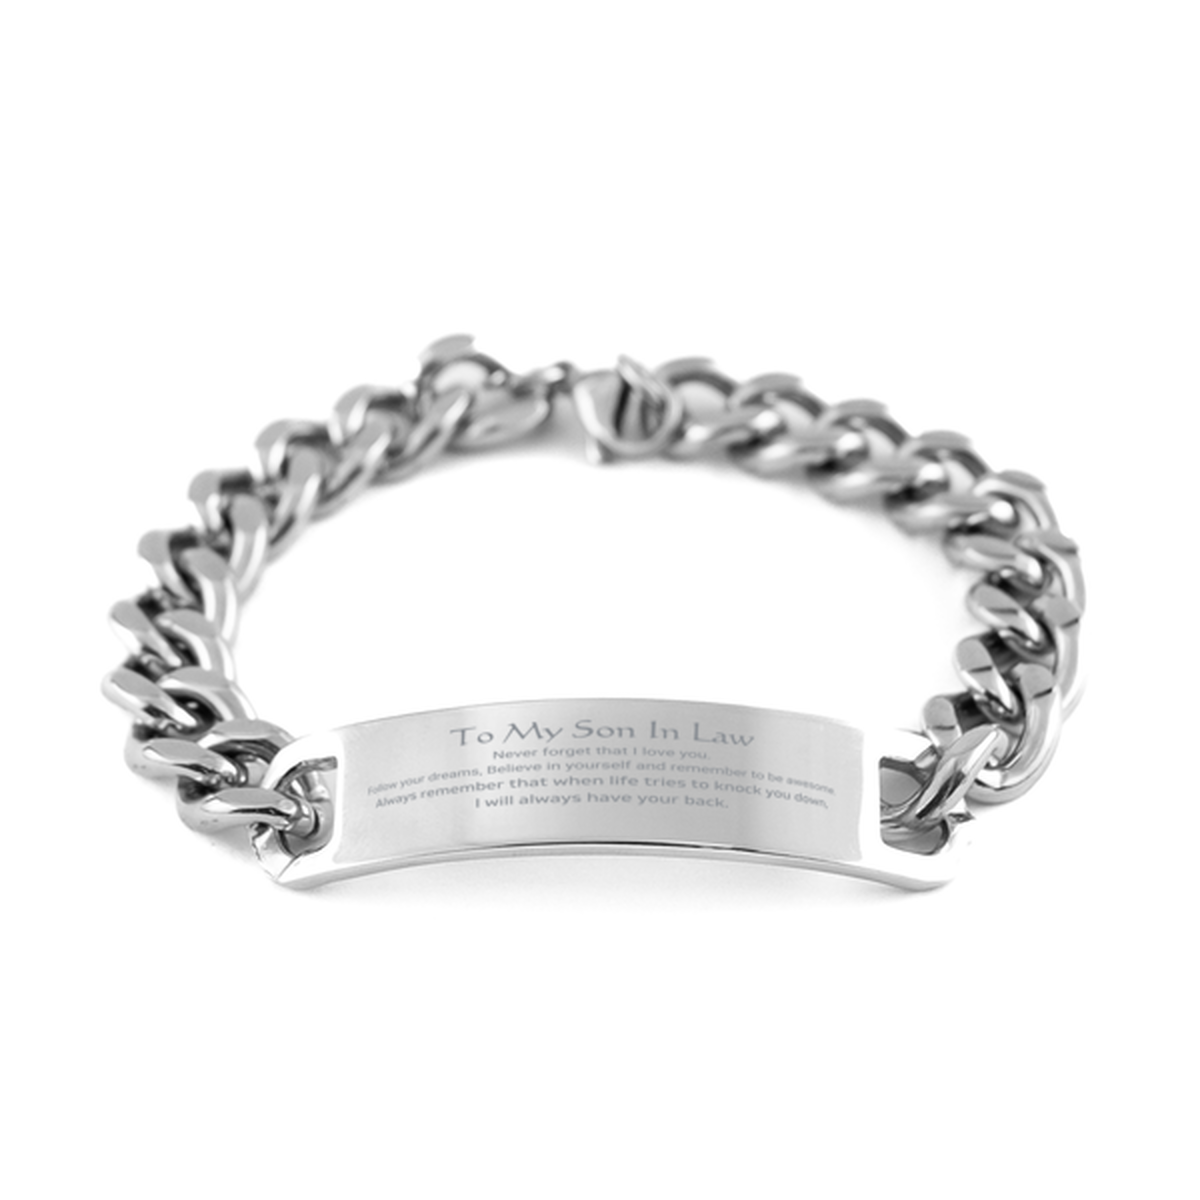 Inspirational Gifts for Son In Law, Follow your dreams, Believe in yourself, Son In Law Cuban Chain Stainless Steel Bracelet, Birthday Christmas Unique Gifts For Son In Law